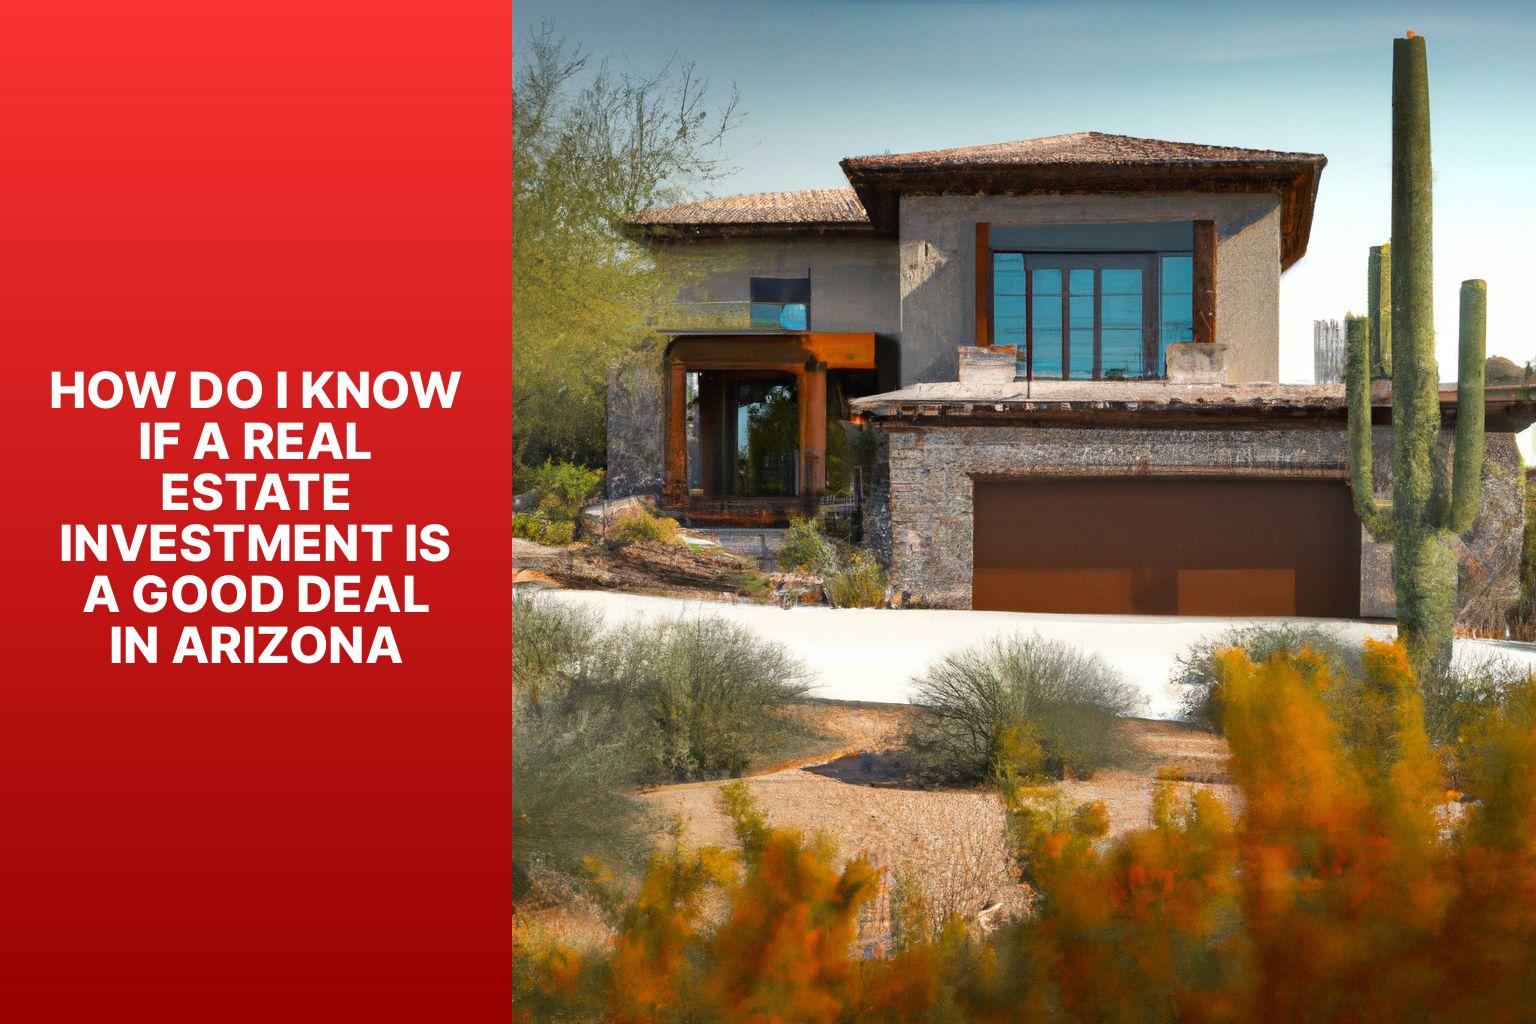 How do I know if a real estate investment is a good deal in Arizona